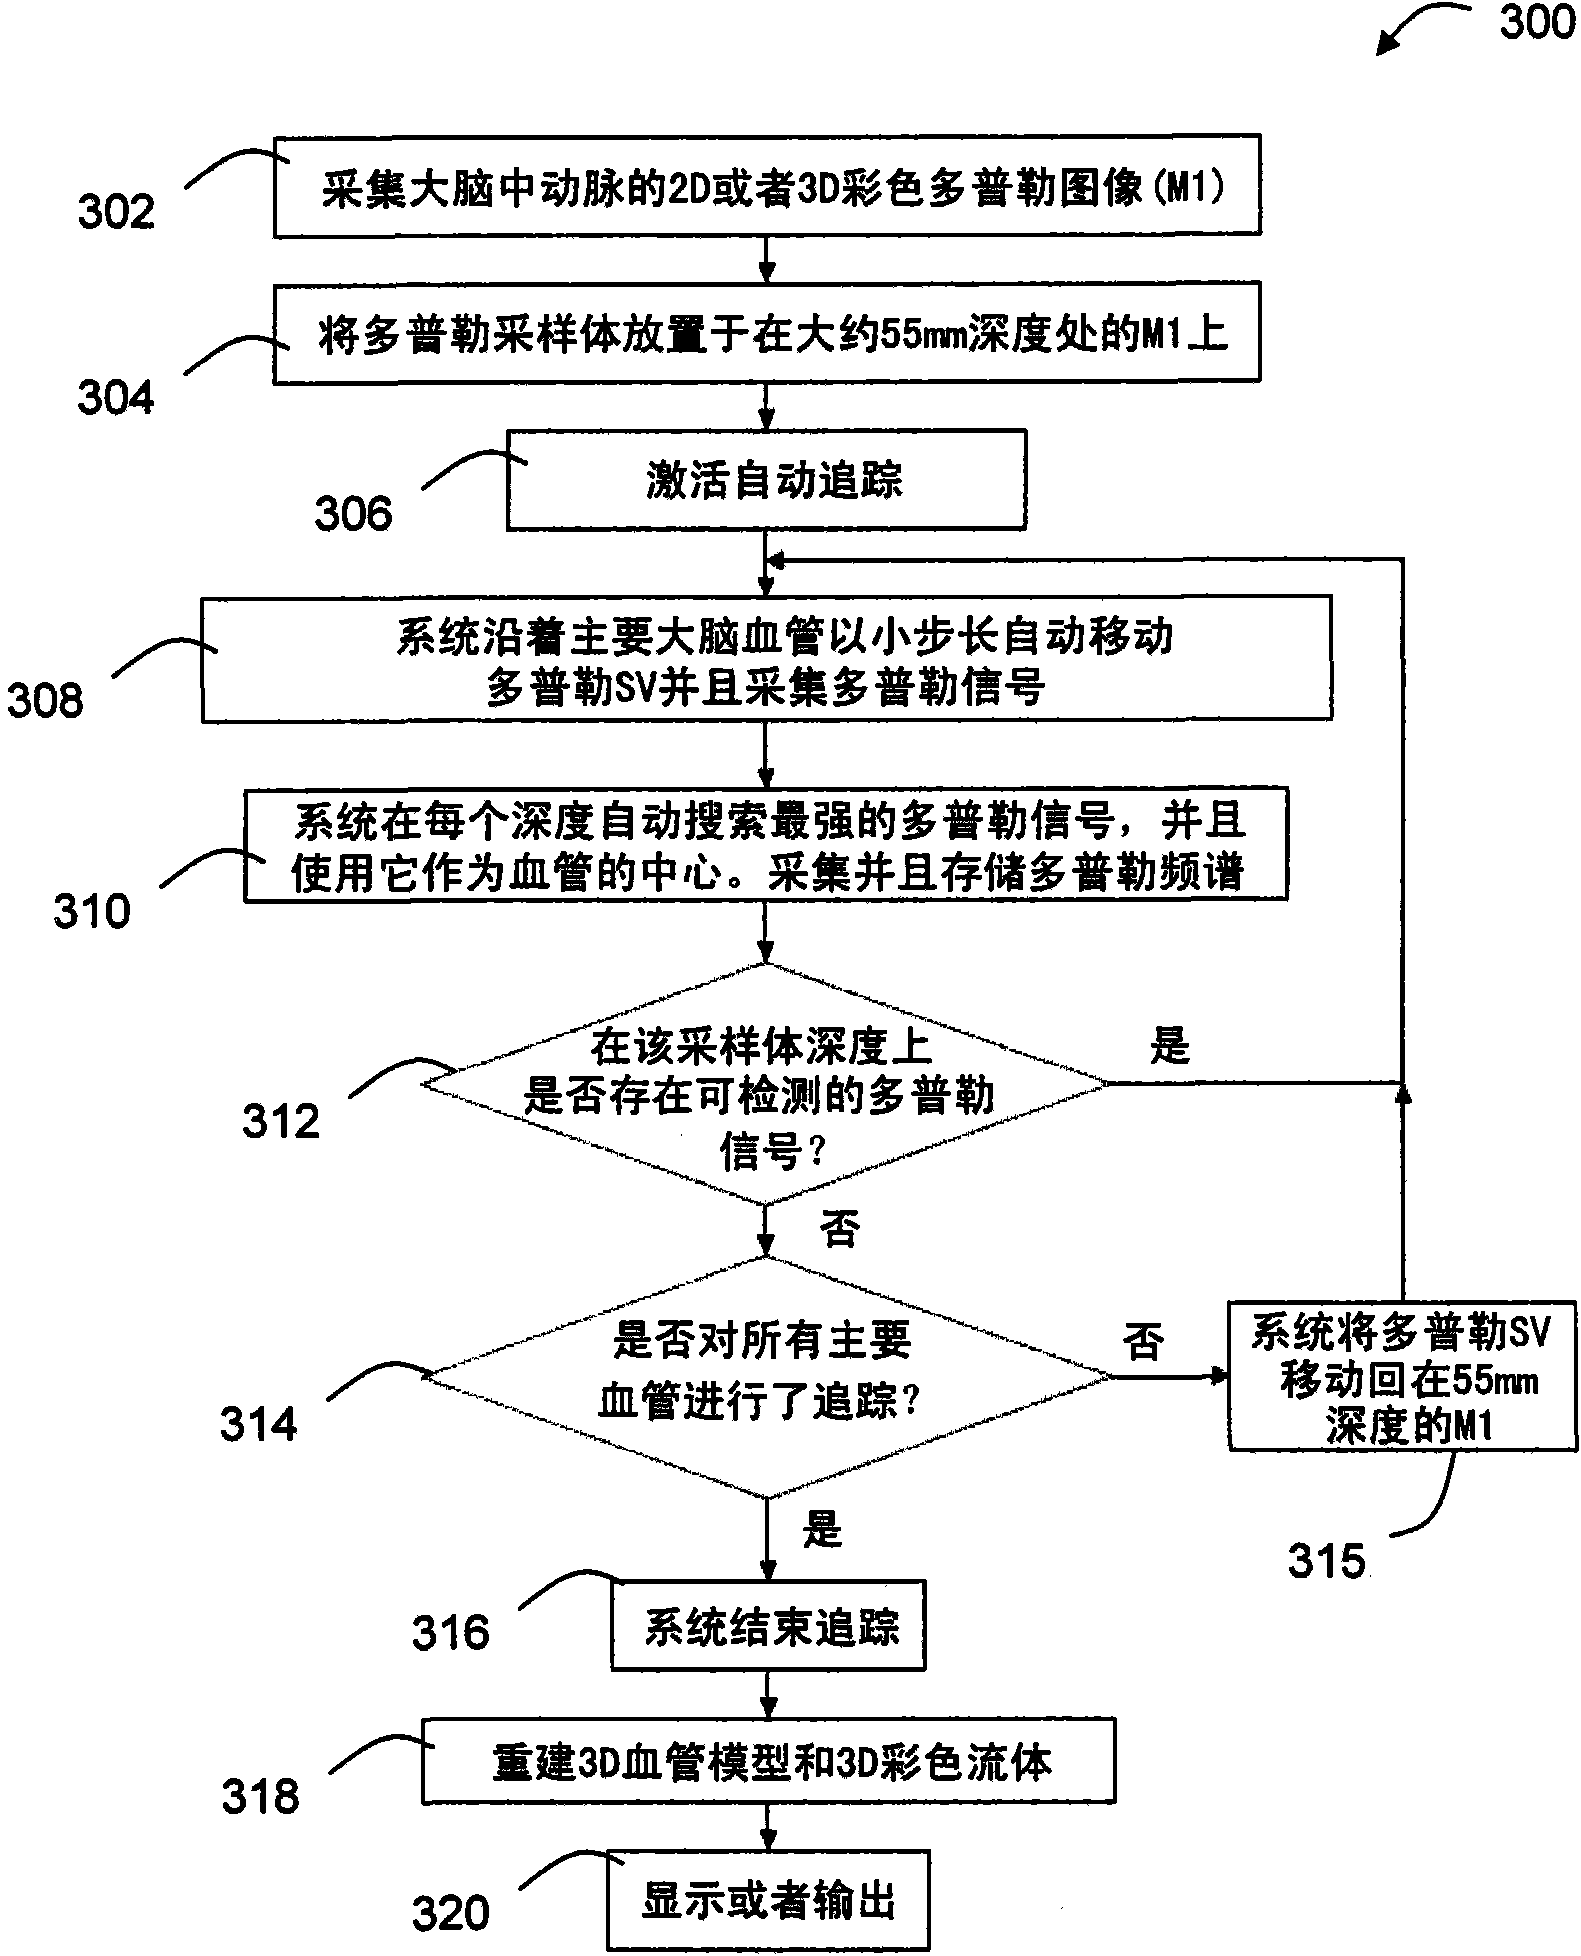 Method and system for imaging vessels